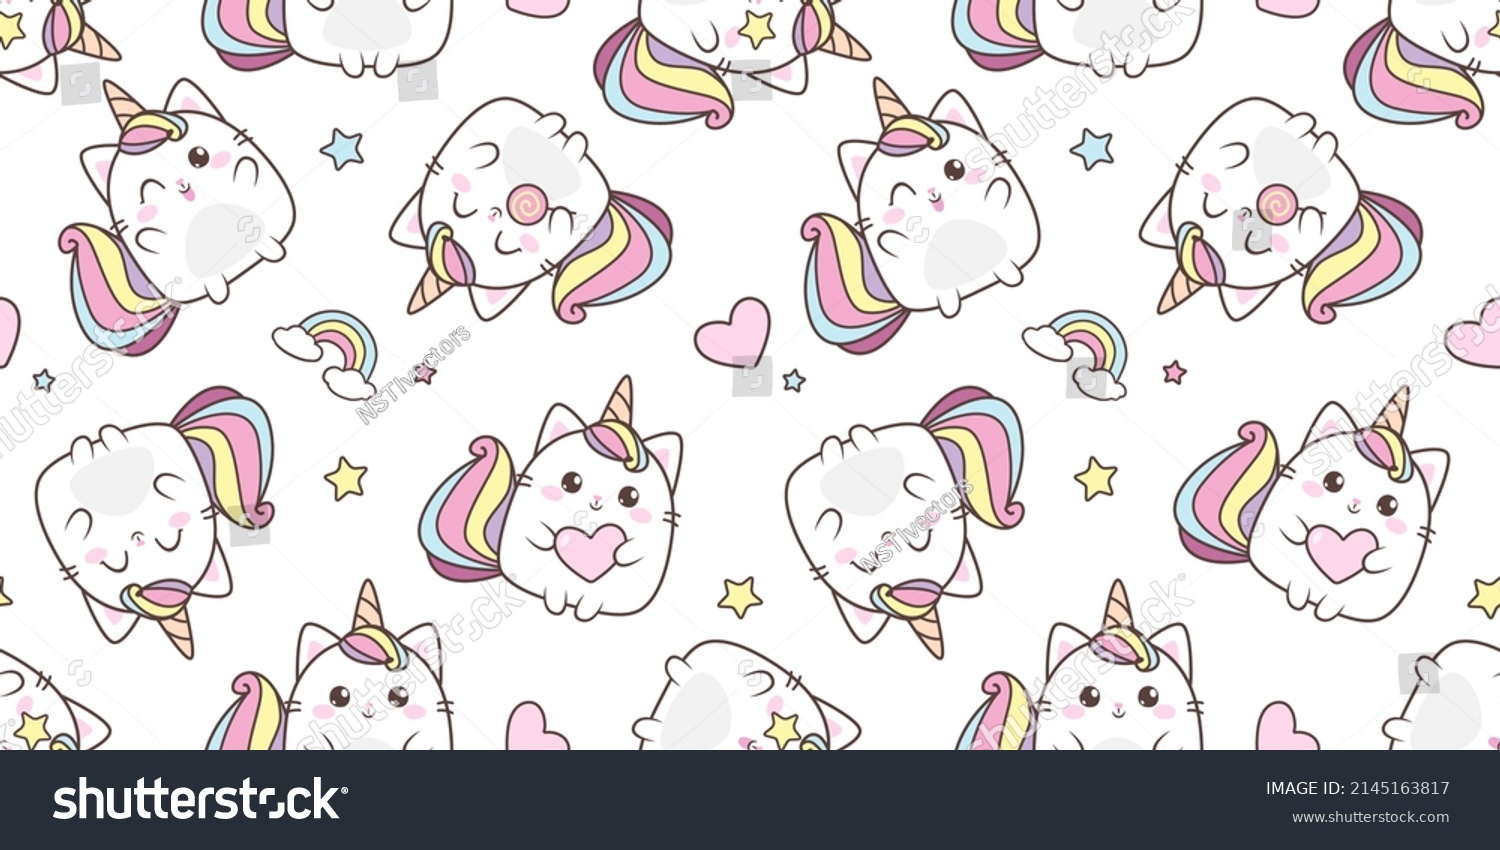 SVG of Cute Baby Cat Caticorn pattern. White Kitten Unicorn  vector seamless pattern. Kawaii Cat Unicorn with lollipop. Isolated vector illustration for kids design prints, posters, t-shirts, stickers svg